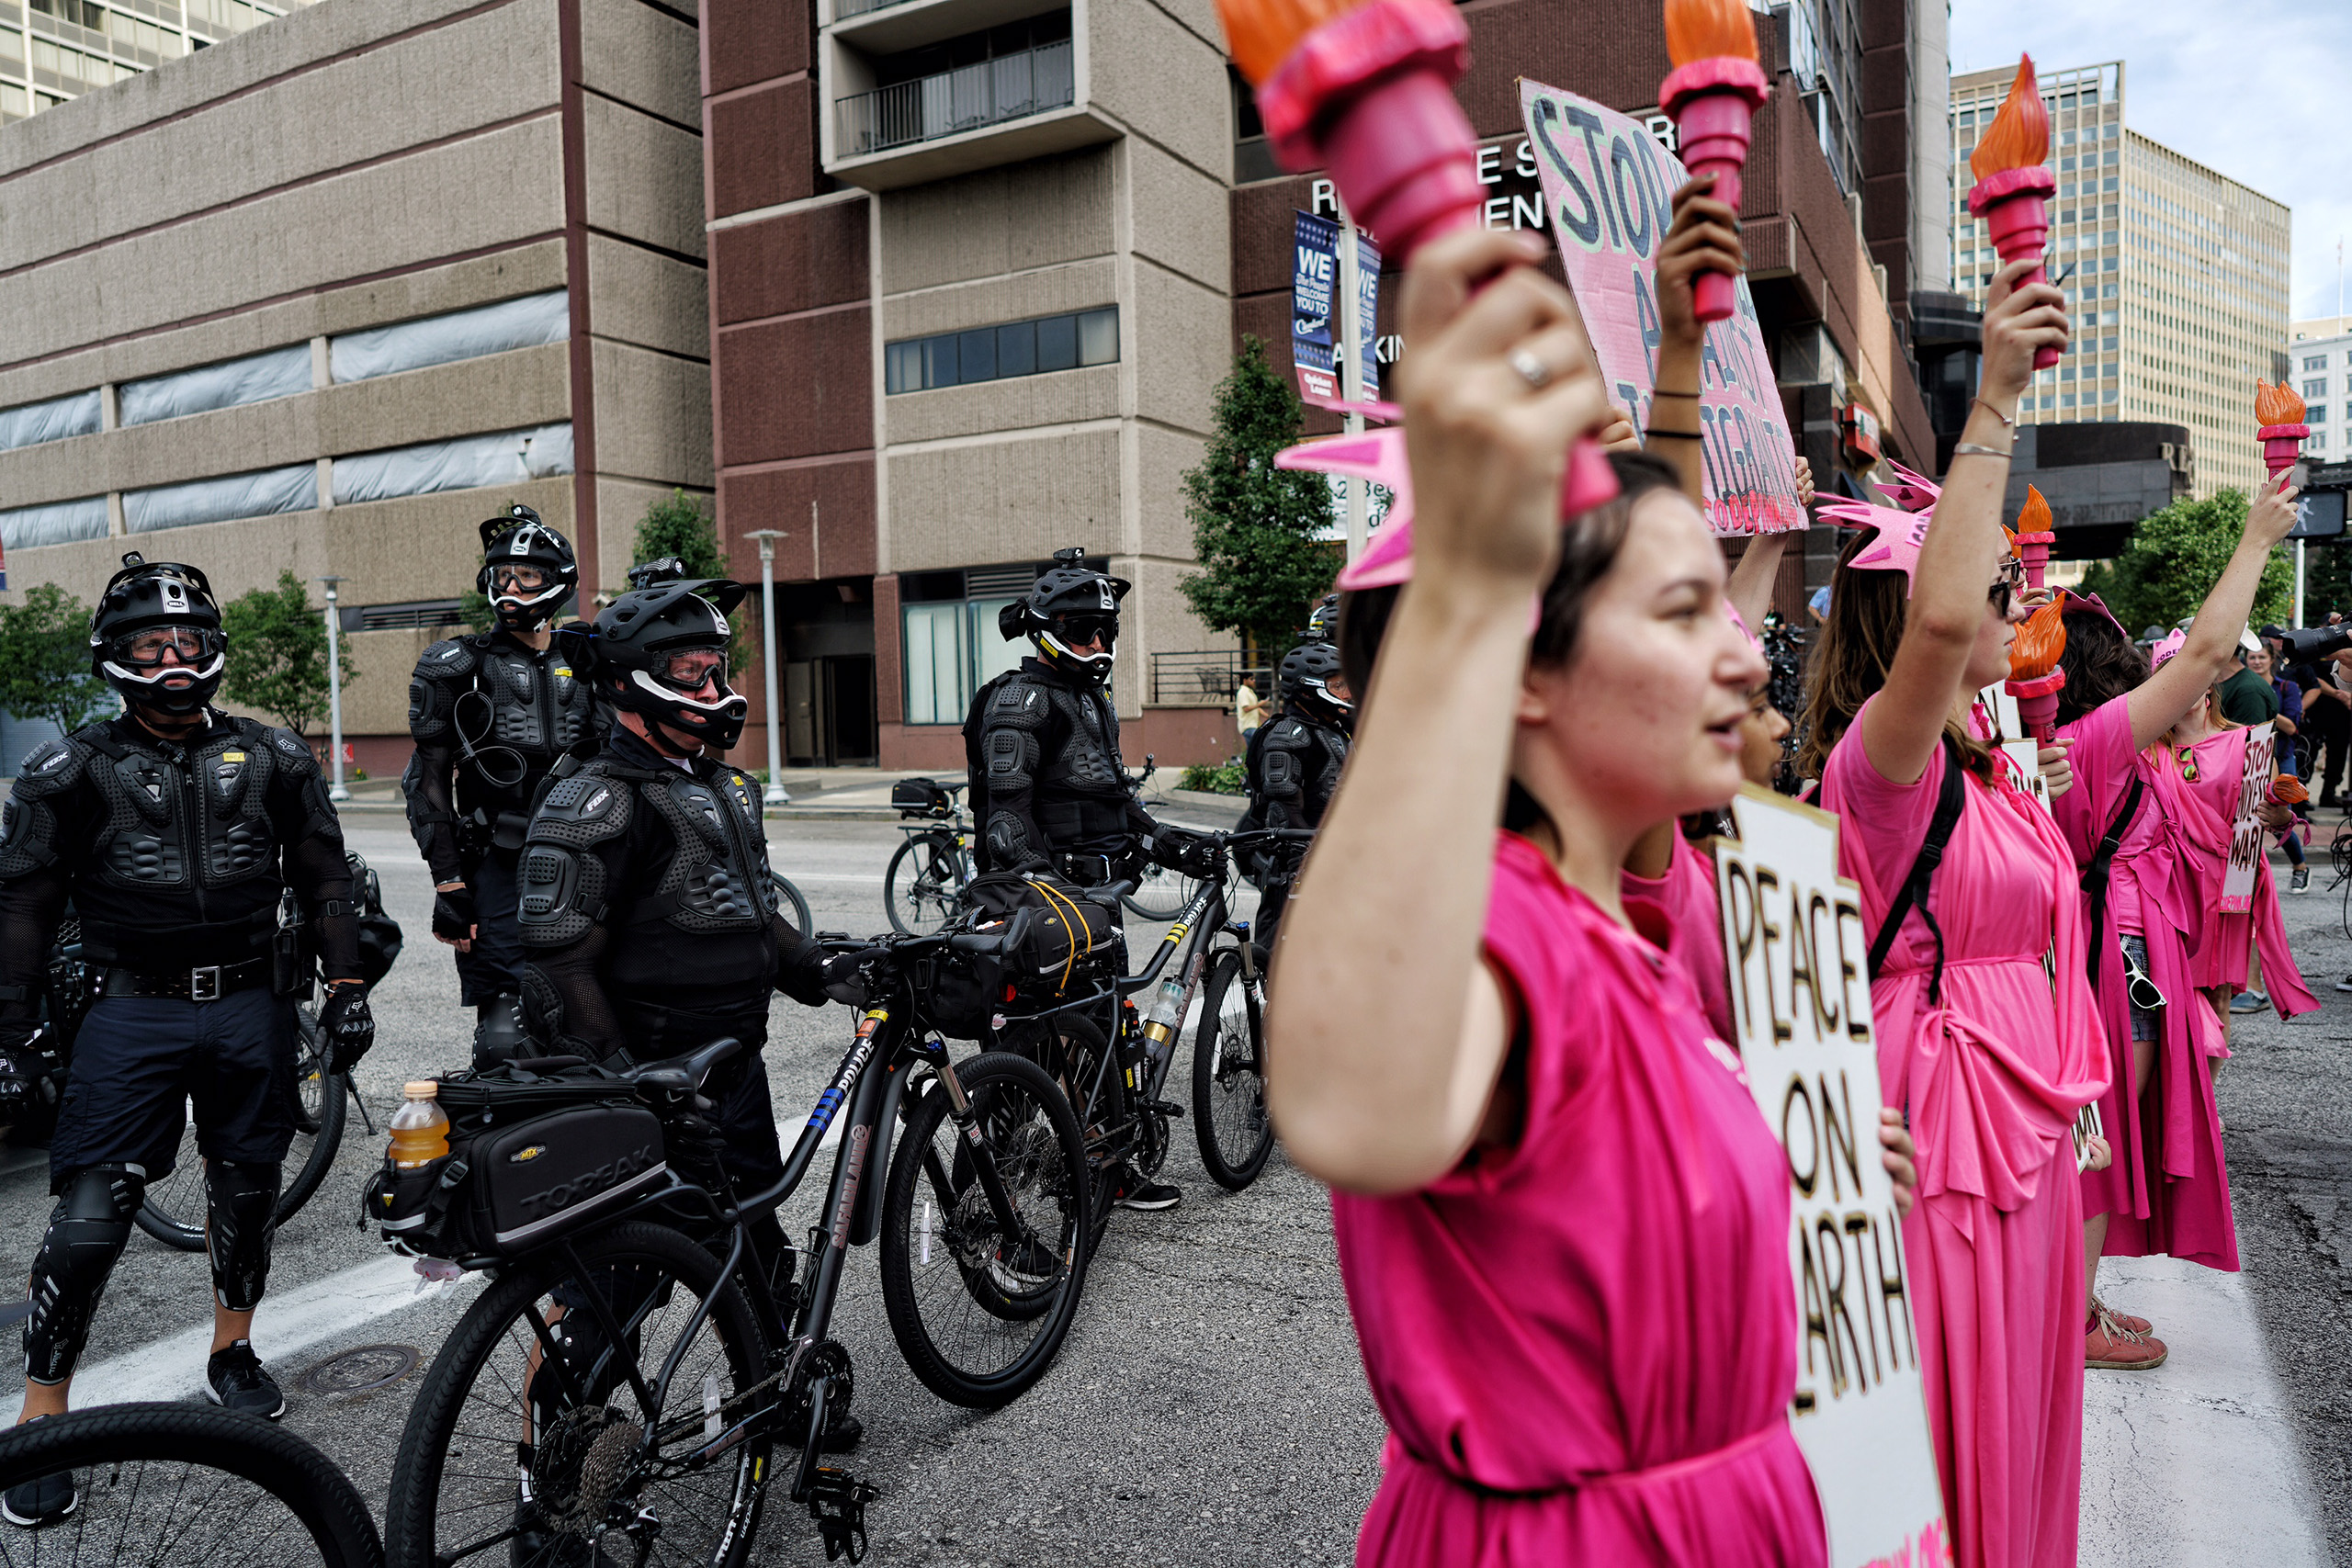 Protestors from Code Pink rally amid preparations for start of the Republican National Convention on July 17, 2016, in Cleveland, Ohio.